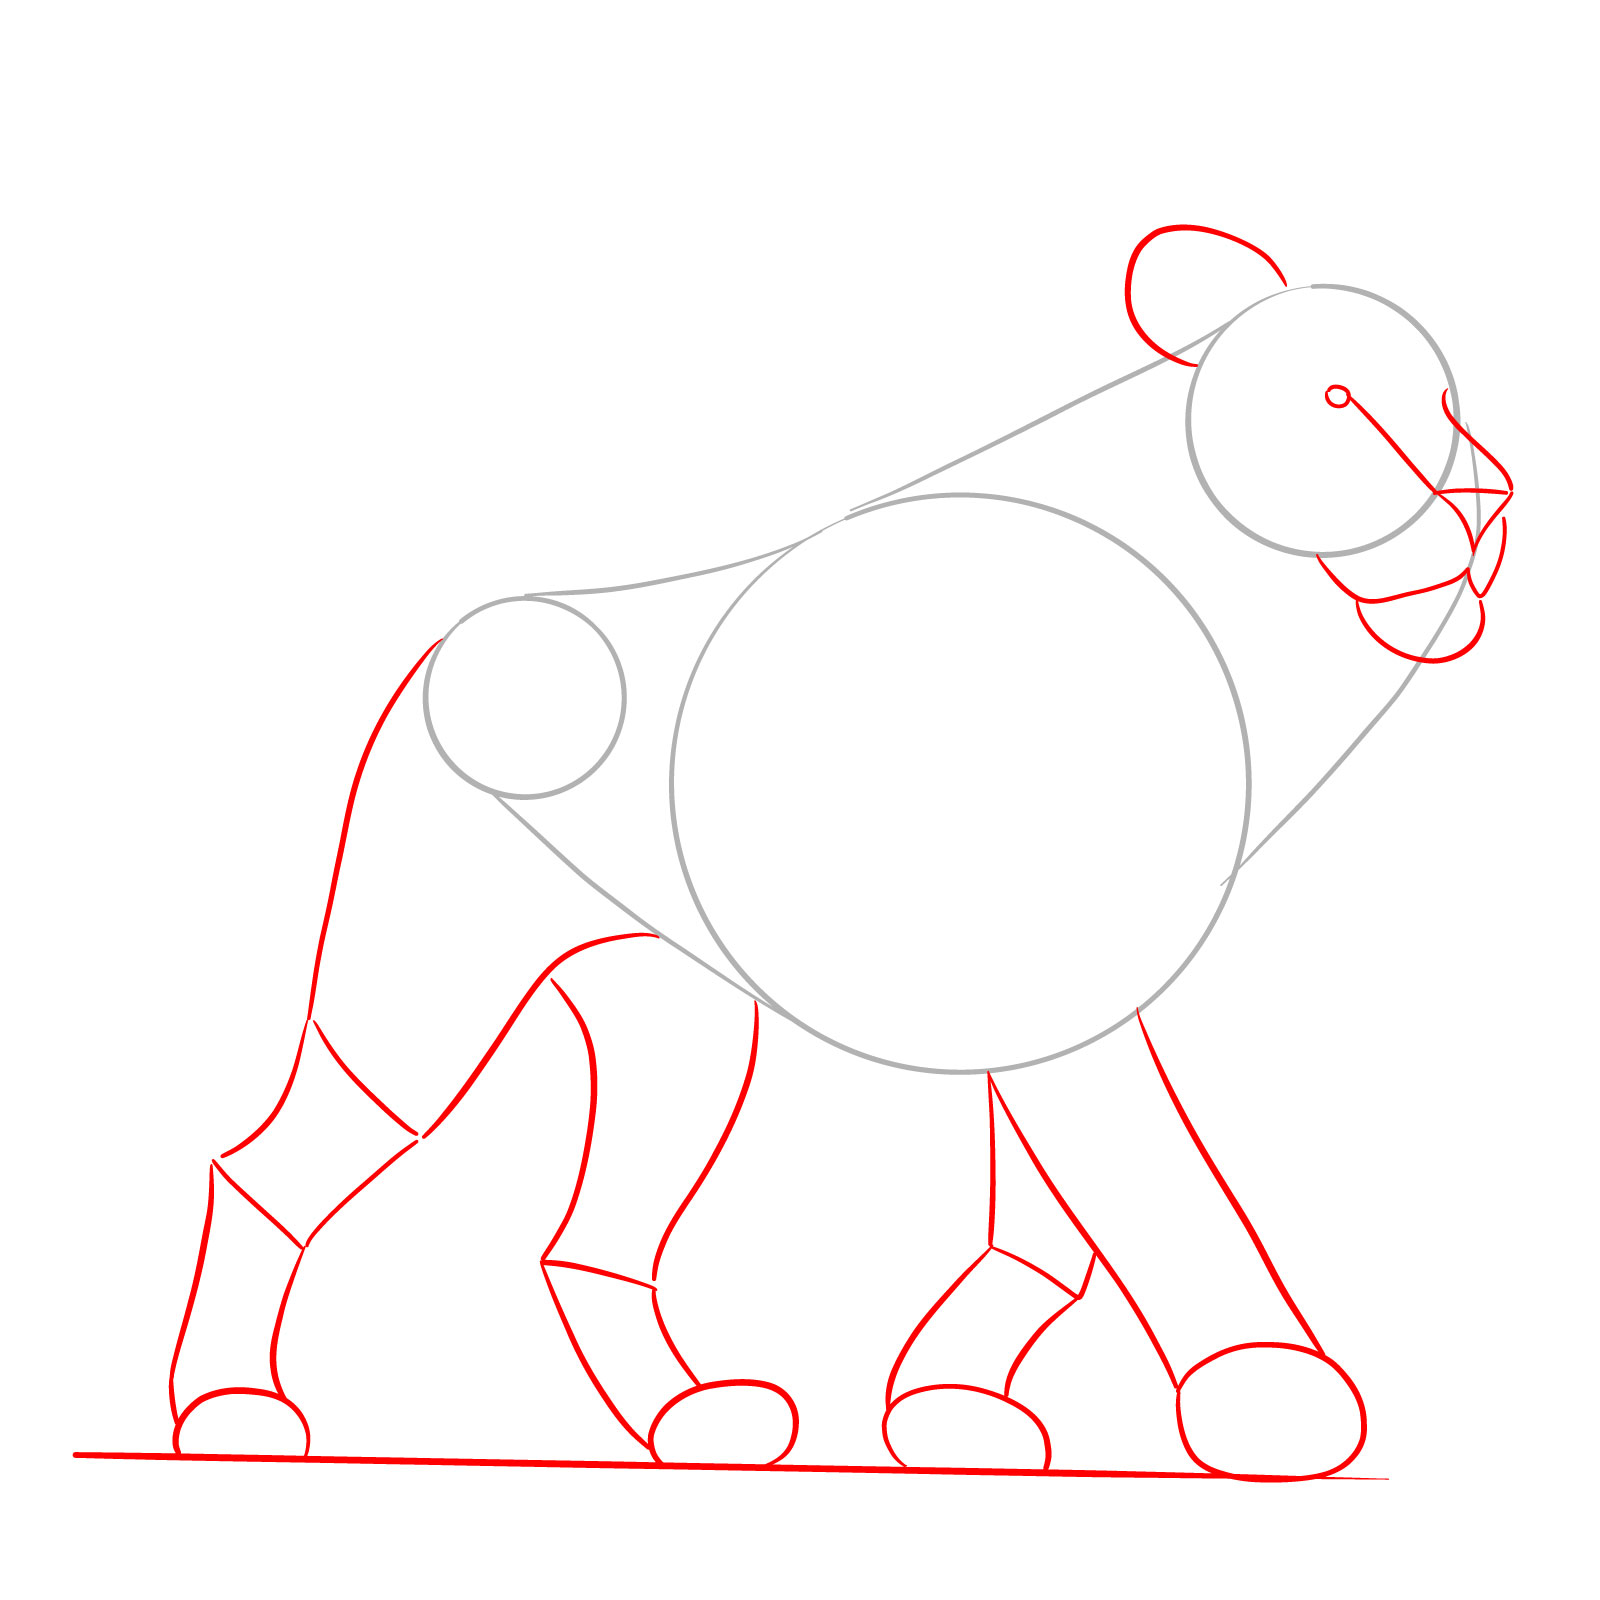 Walking lion drawing showing initial leg shapes and facial guidelines - step 02